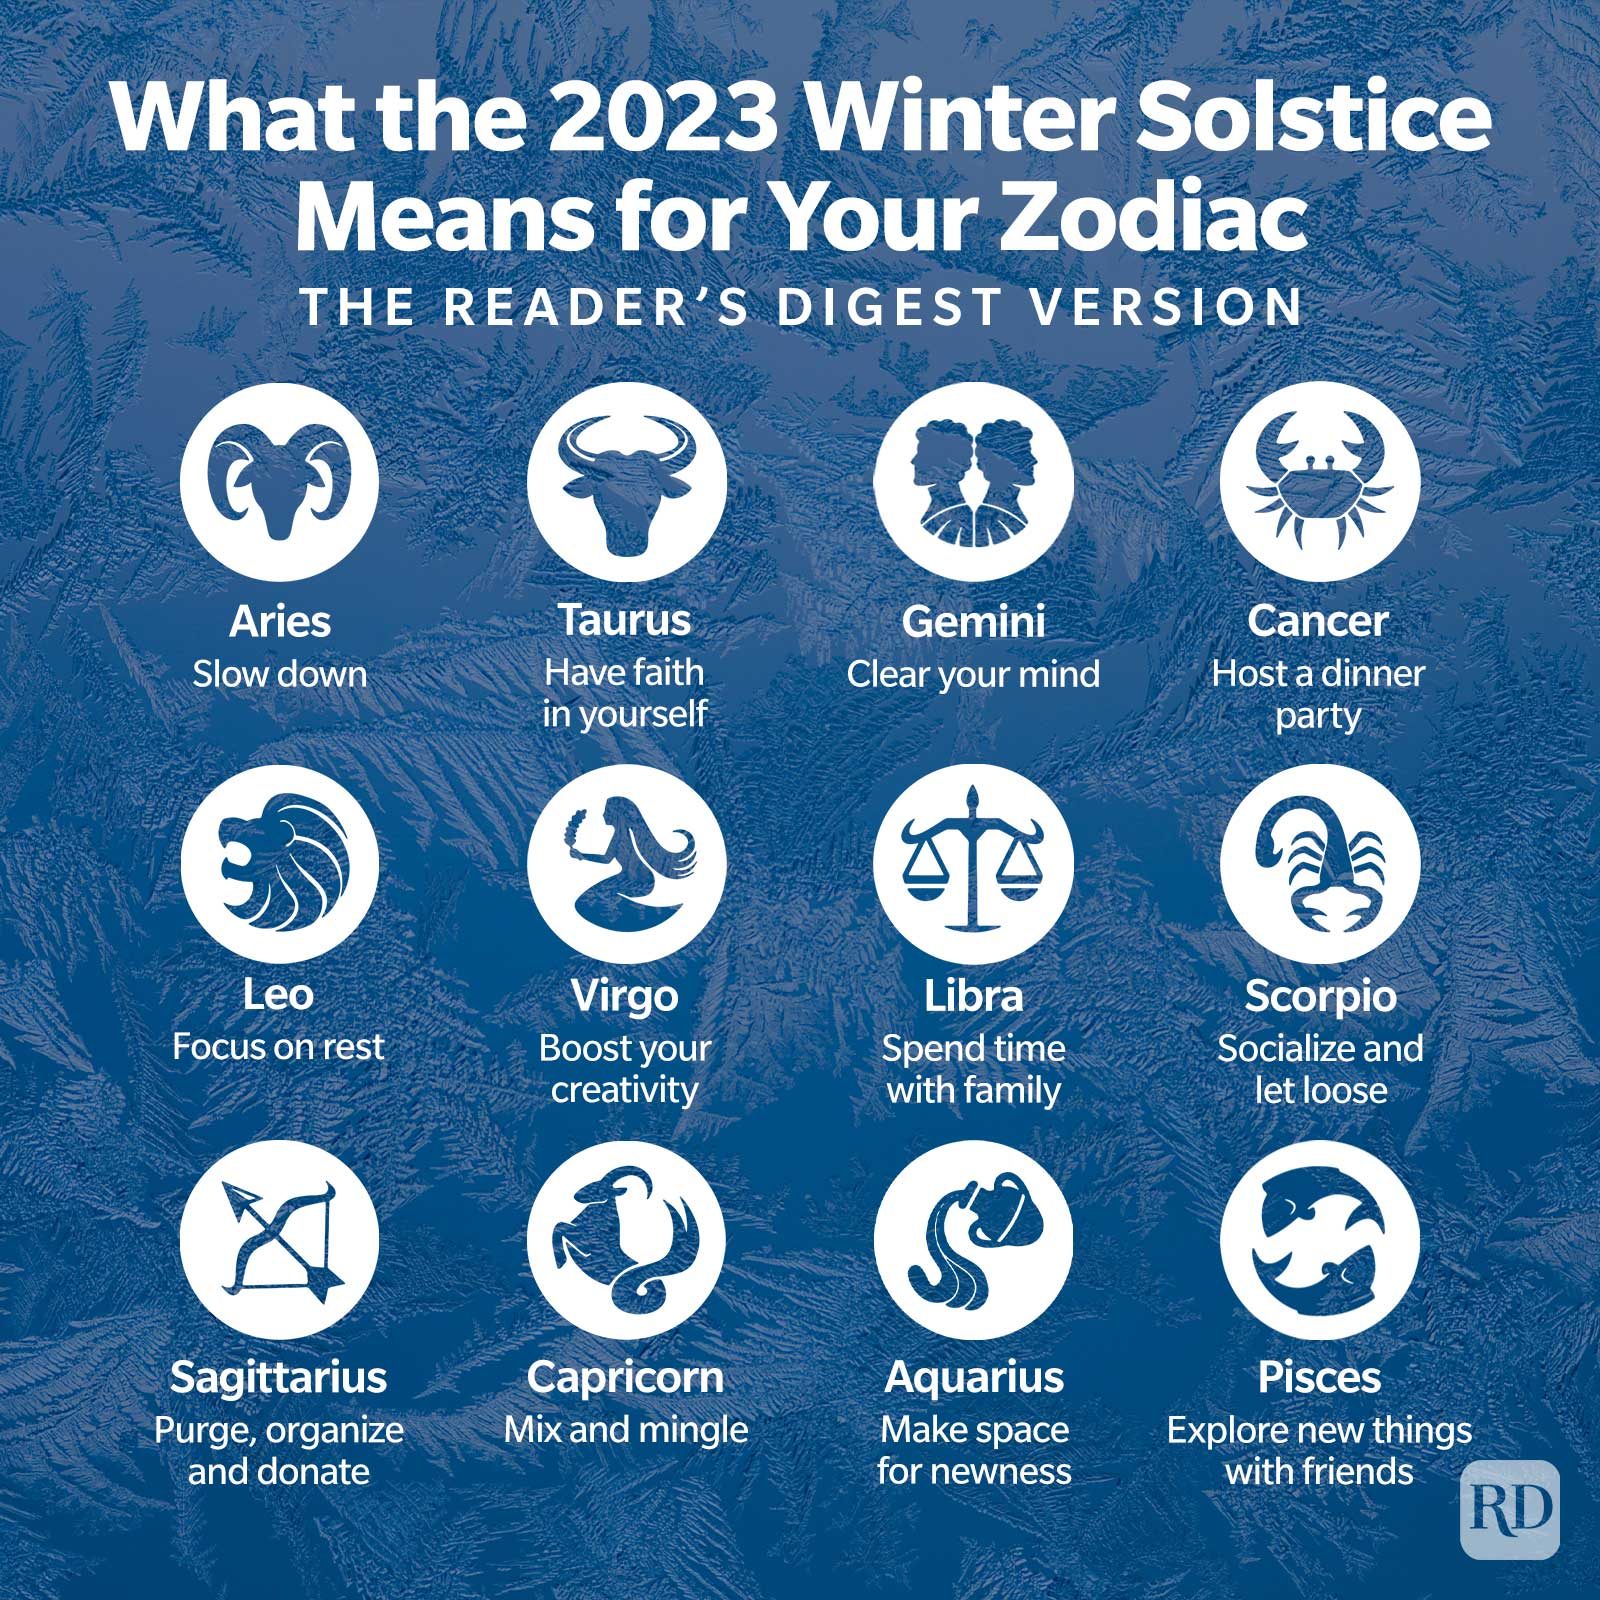 What's the winter solstice?